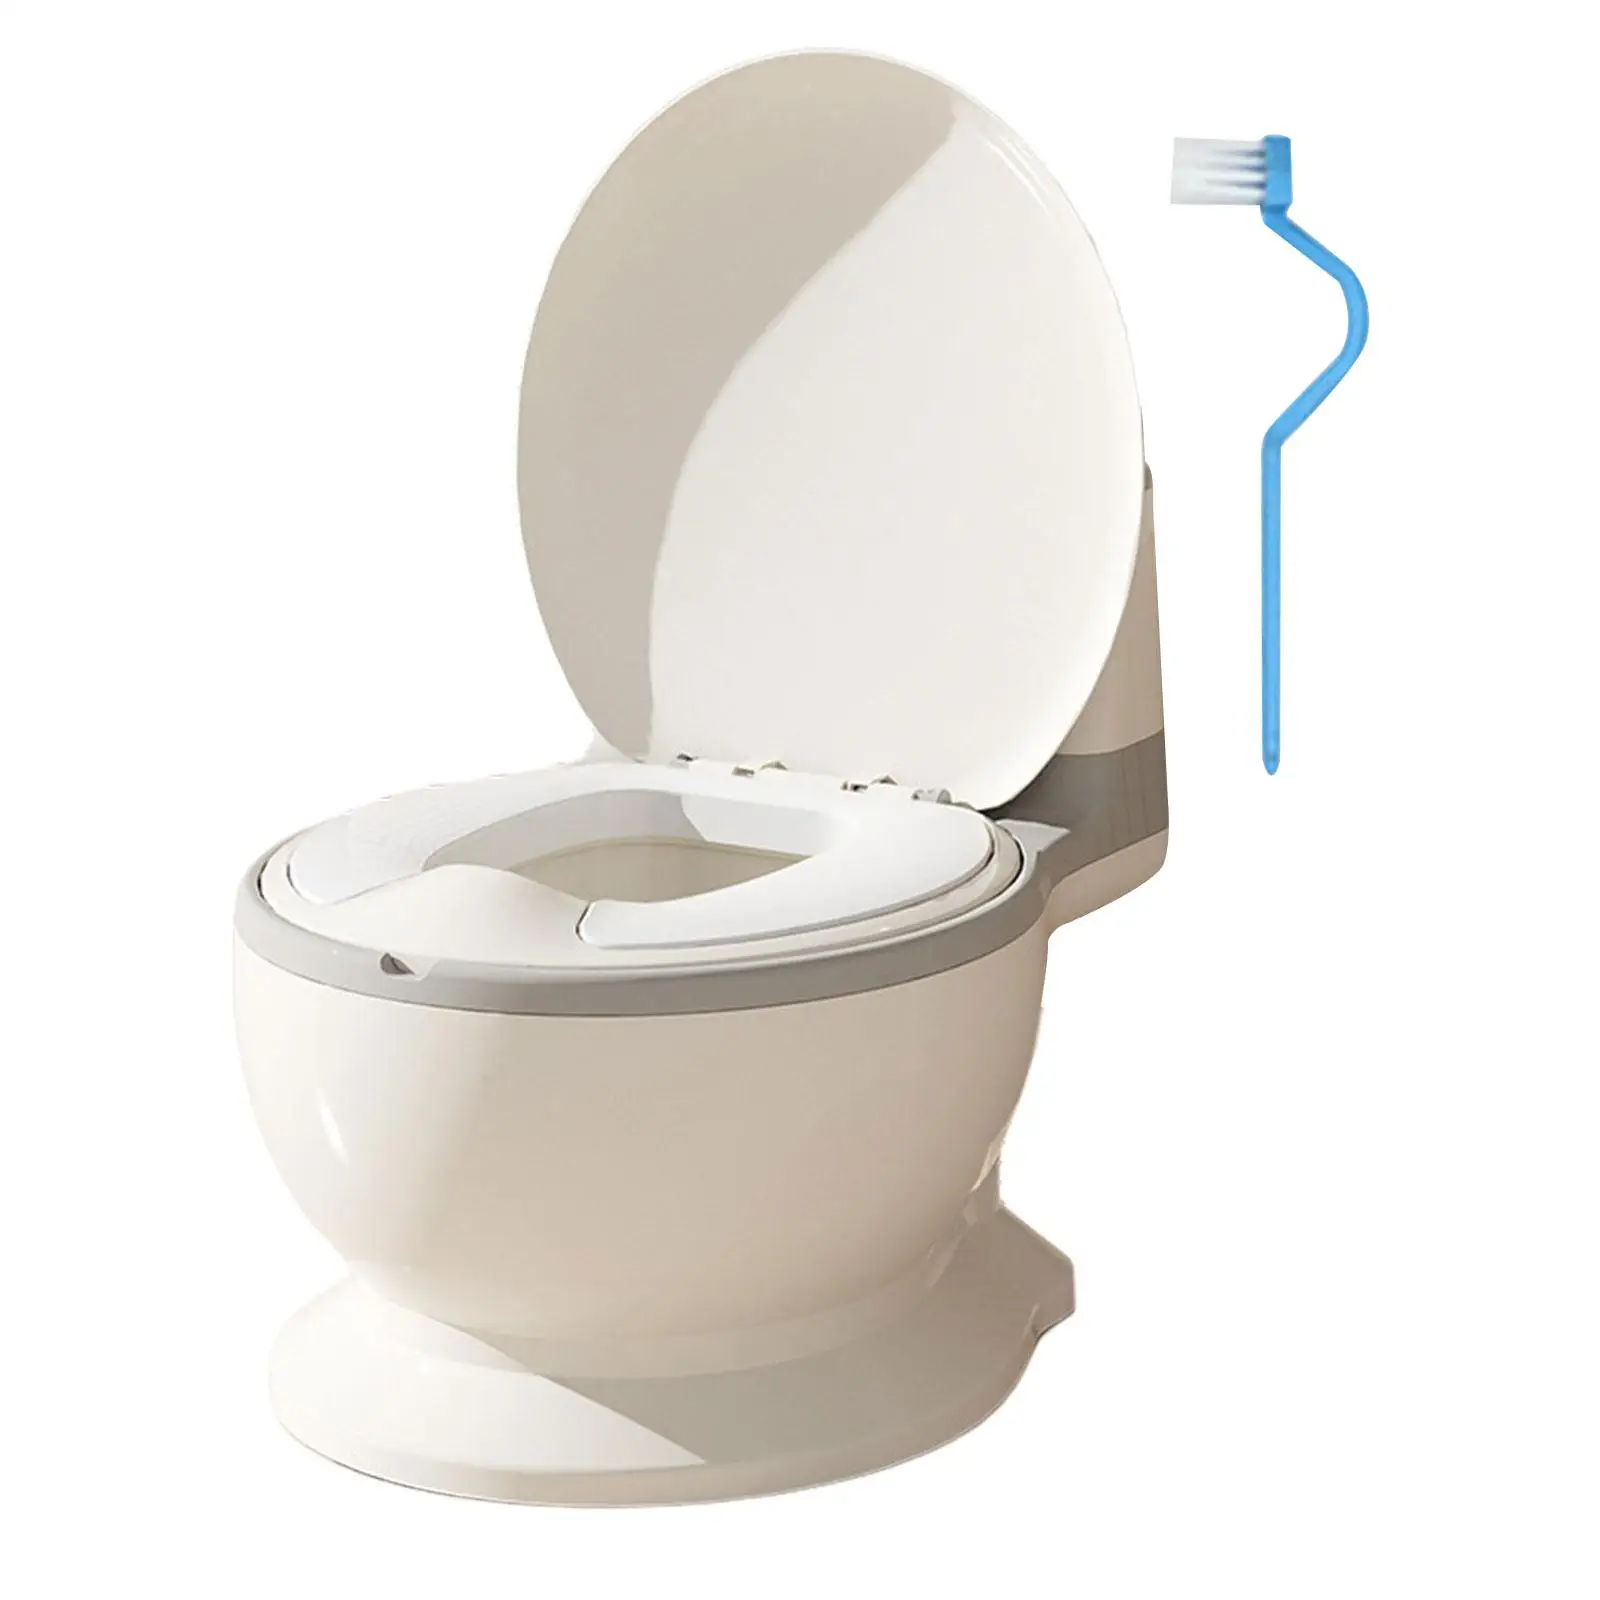 Baby Potty Toilet with Wipe Storage Lifelike Flush Button Comfortable Realistic Toilet for Bedroom Girls Boys Babies Ages 0-7